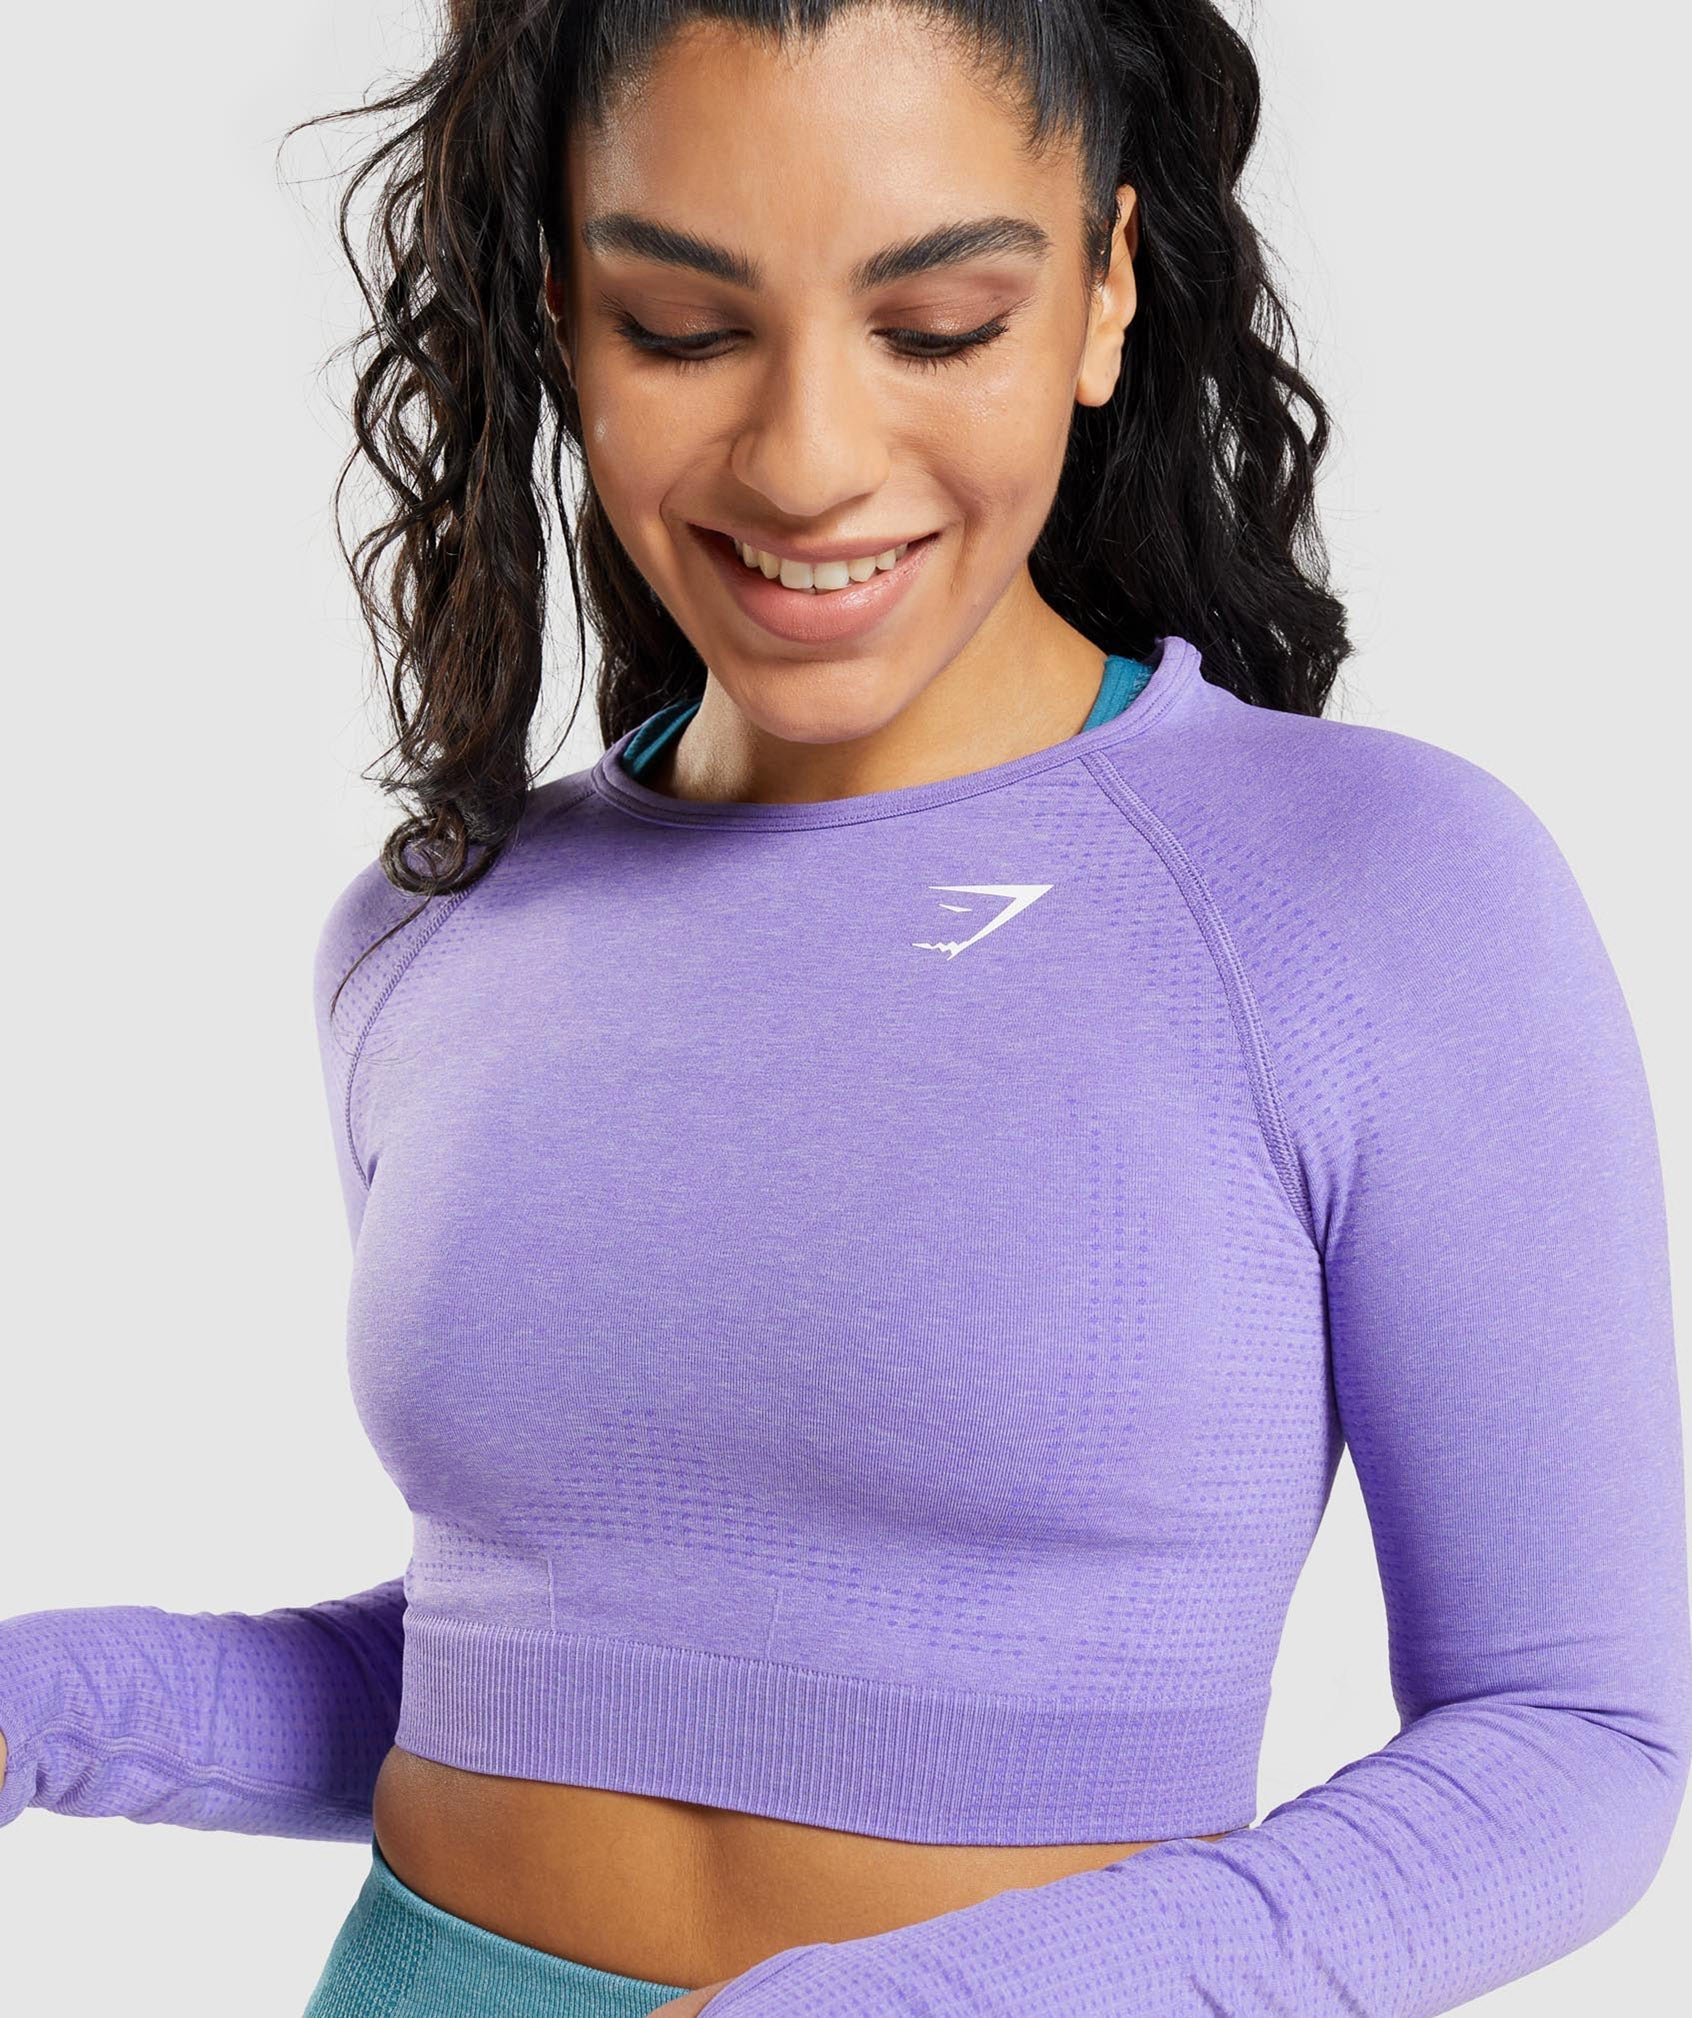 AYBL Elevate Seamless Long Sleeve Crop Top - Purple is a perfect